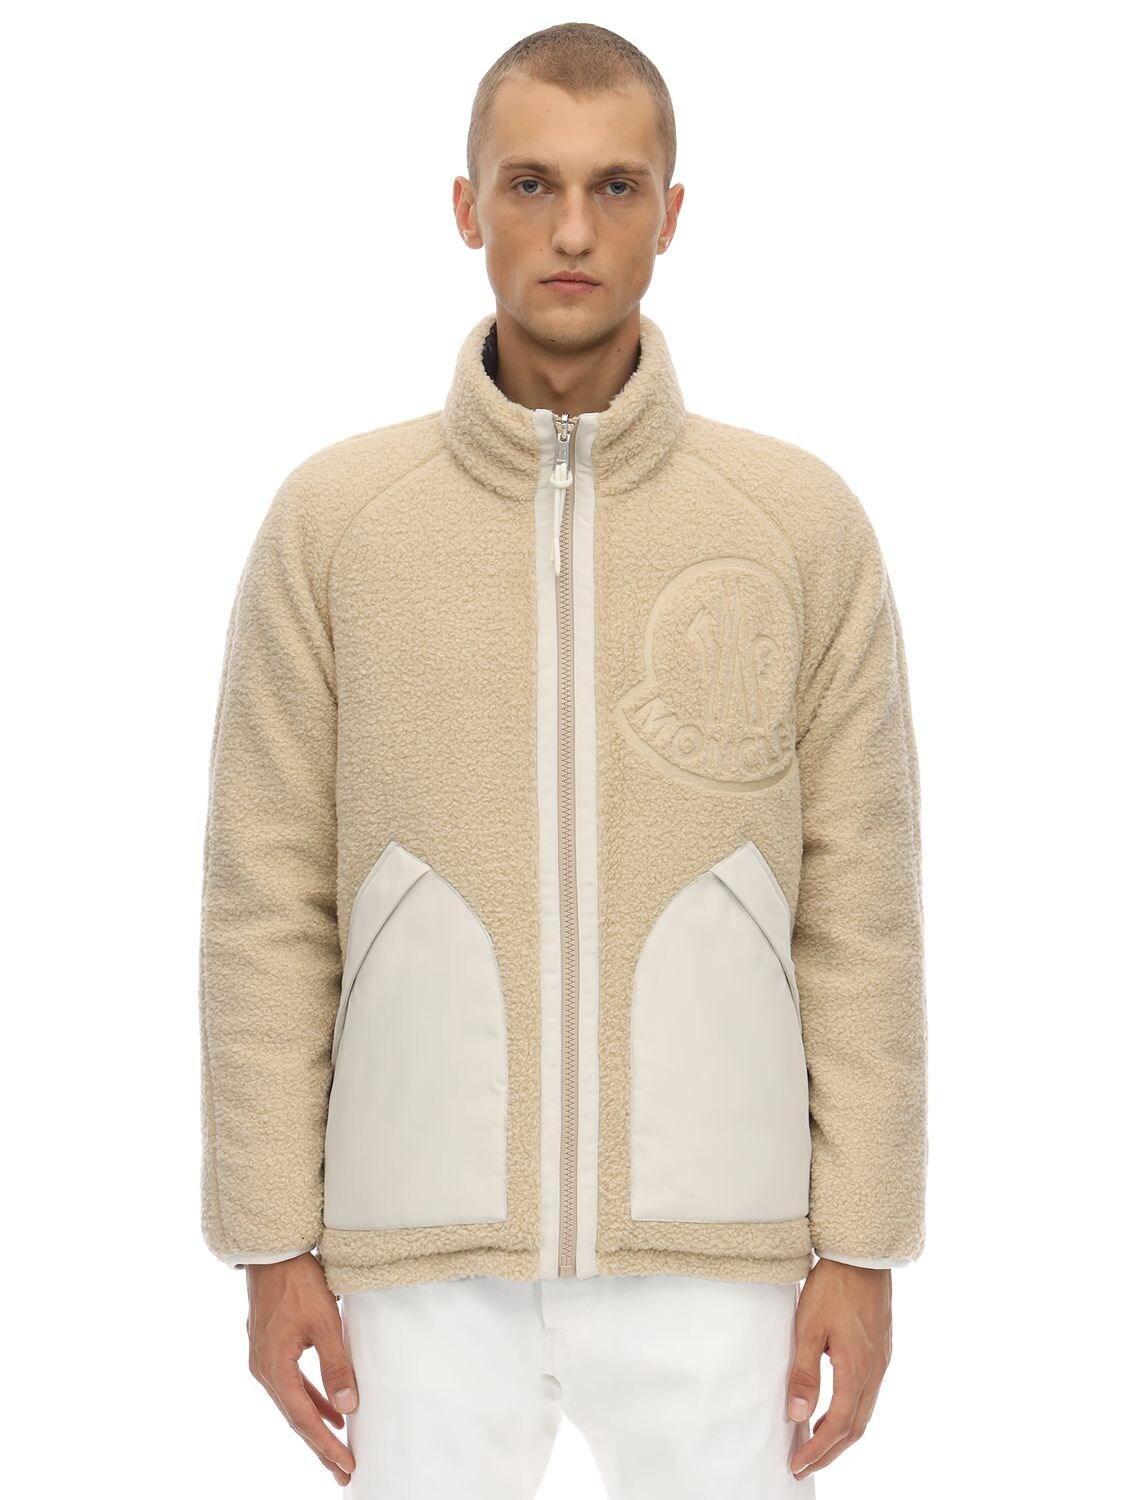 Moncler Genius 2 Moncler 1952 Reversible Fleece And Quilted Shell 